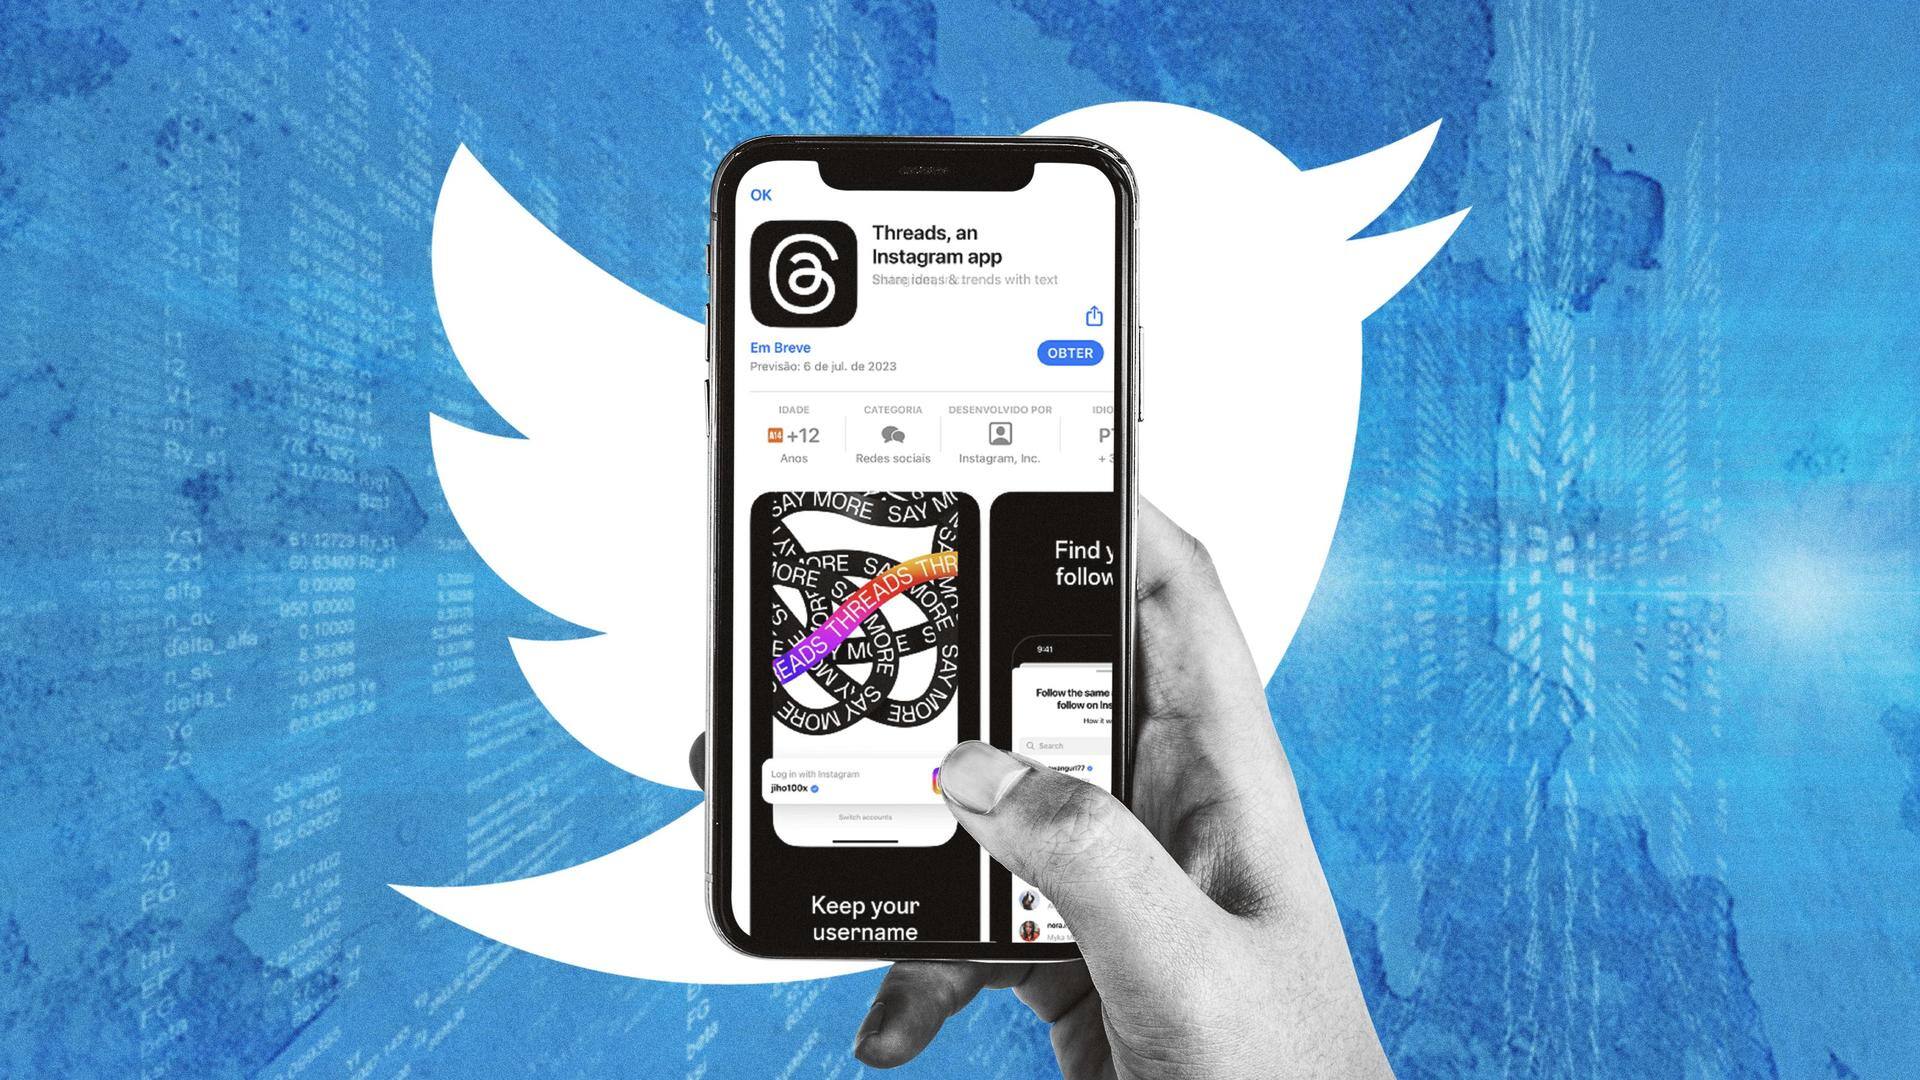 Twitter threatens to sue Meta over Threads app: Here's why